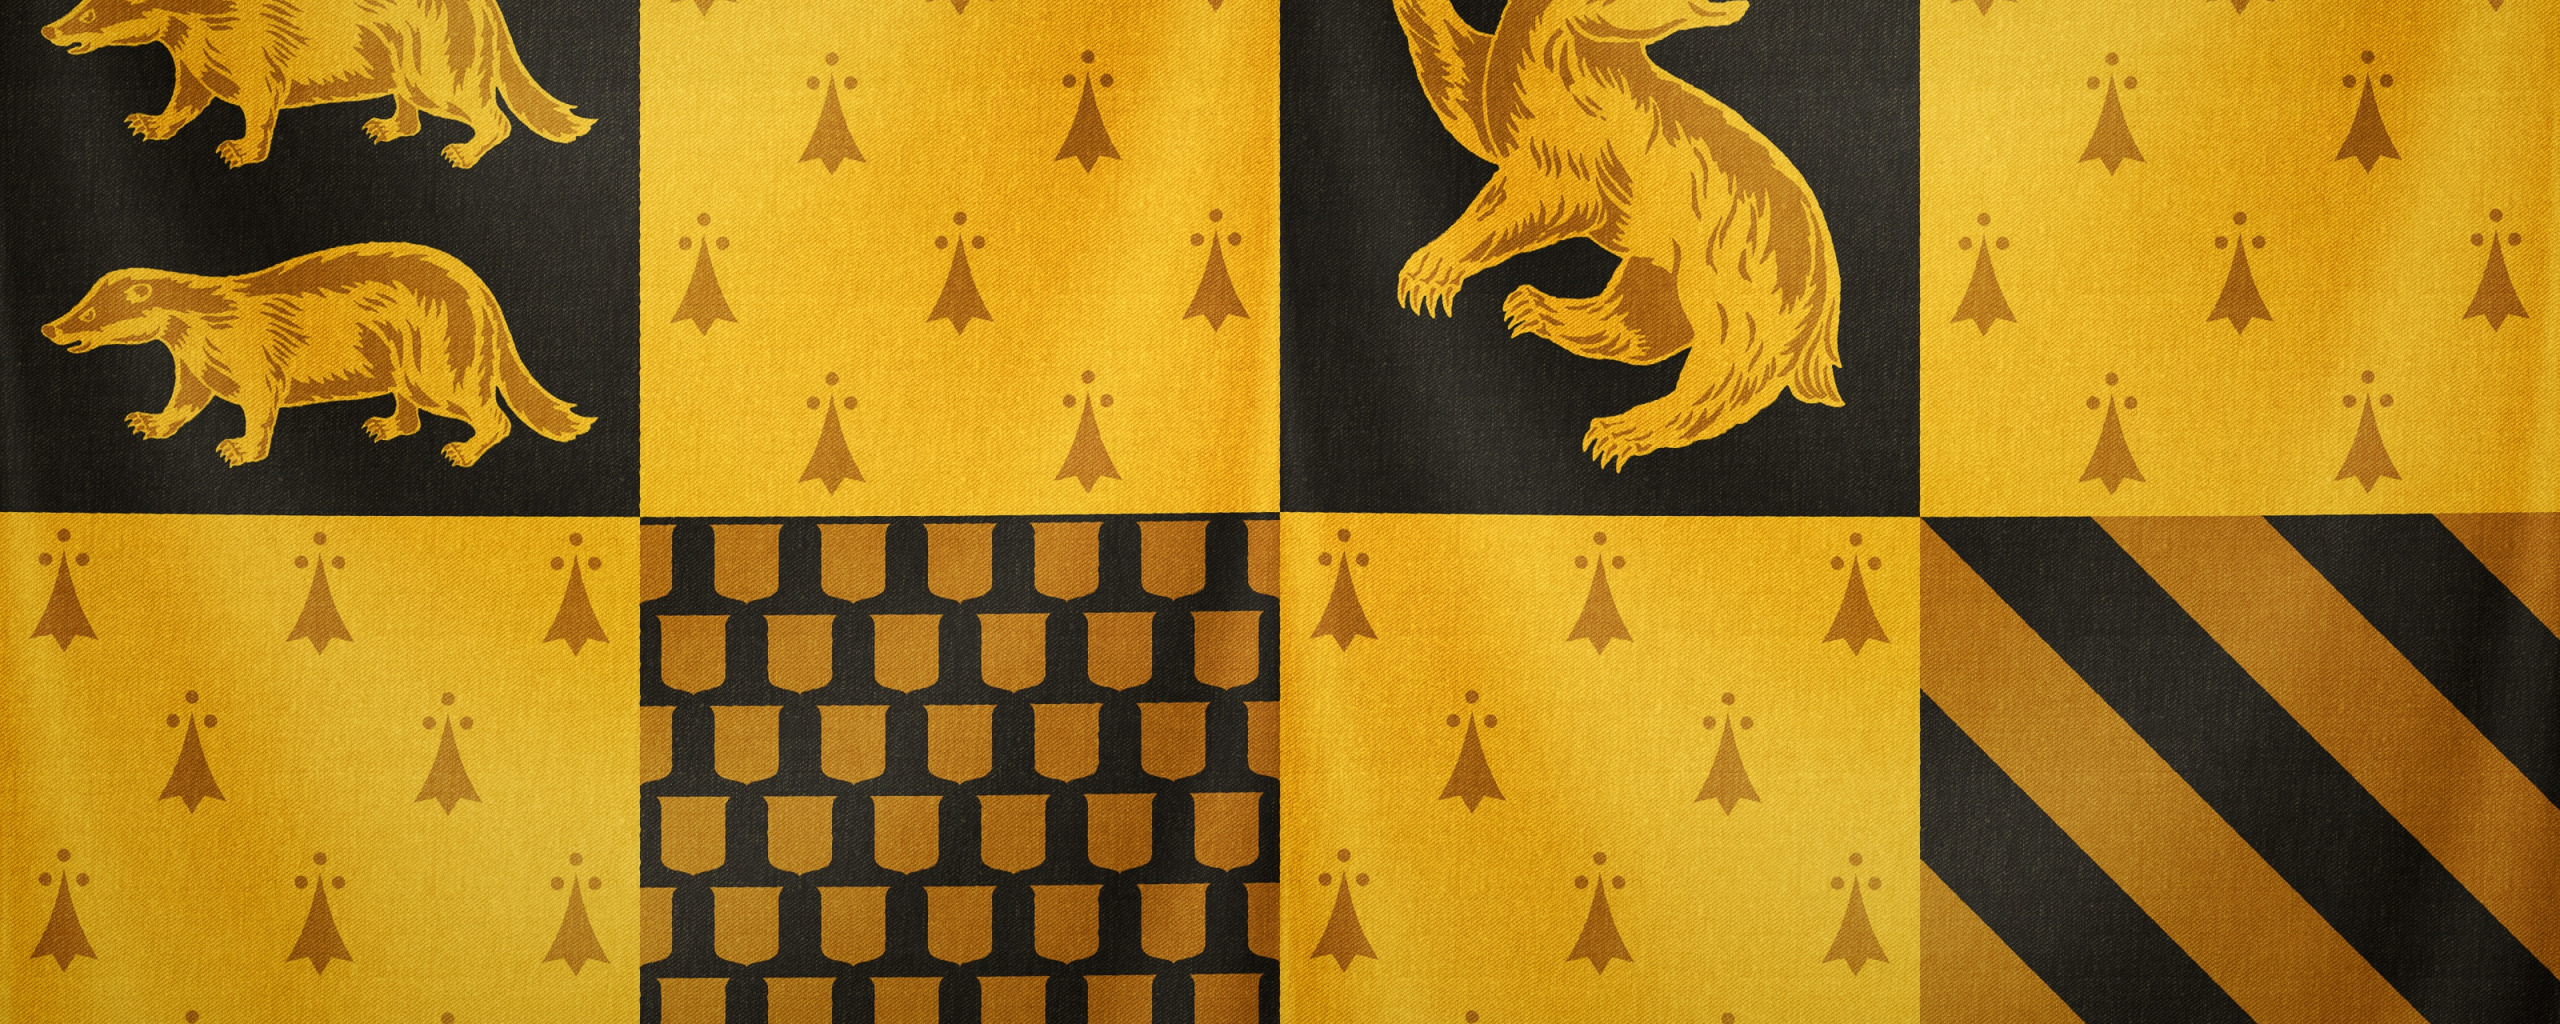 Free Wallpapers, download. black, yellow, texture, Hogwarts, Harry Potter, ...